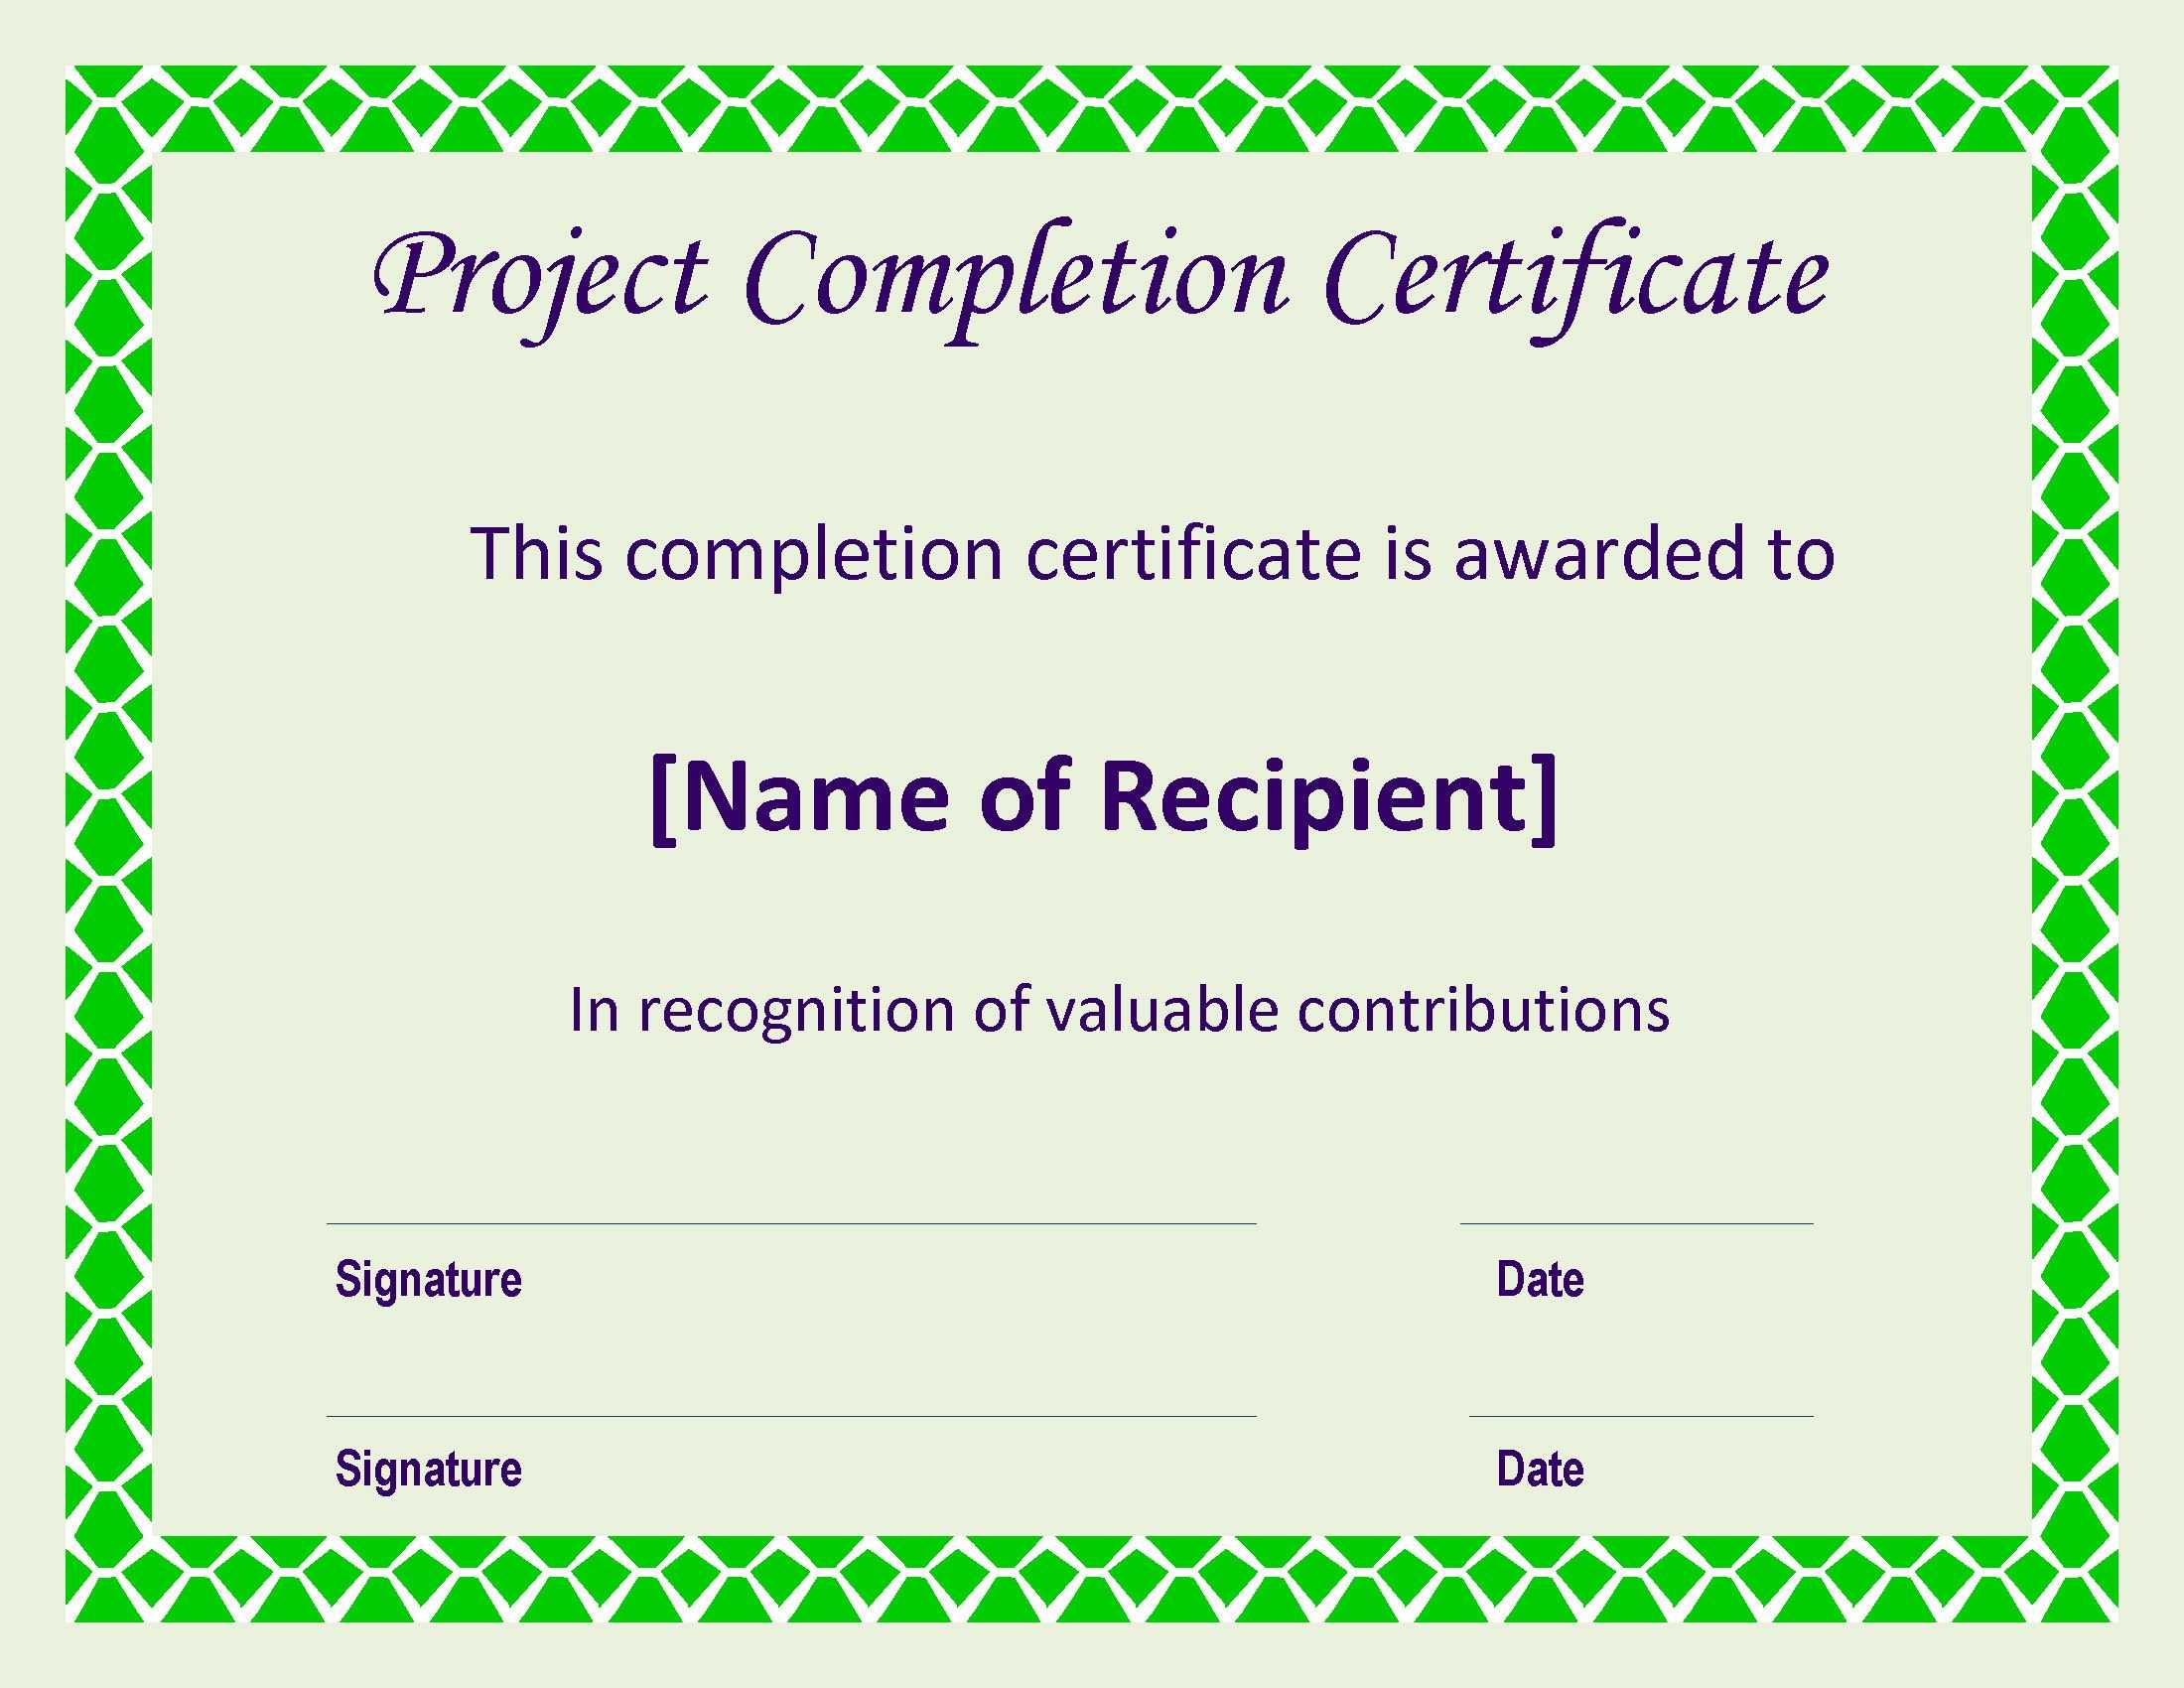 Certificate Of Completion Project | Templates At In Certificate Of Completion Construction Templates